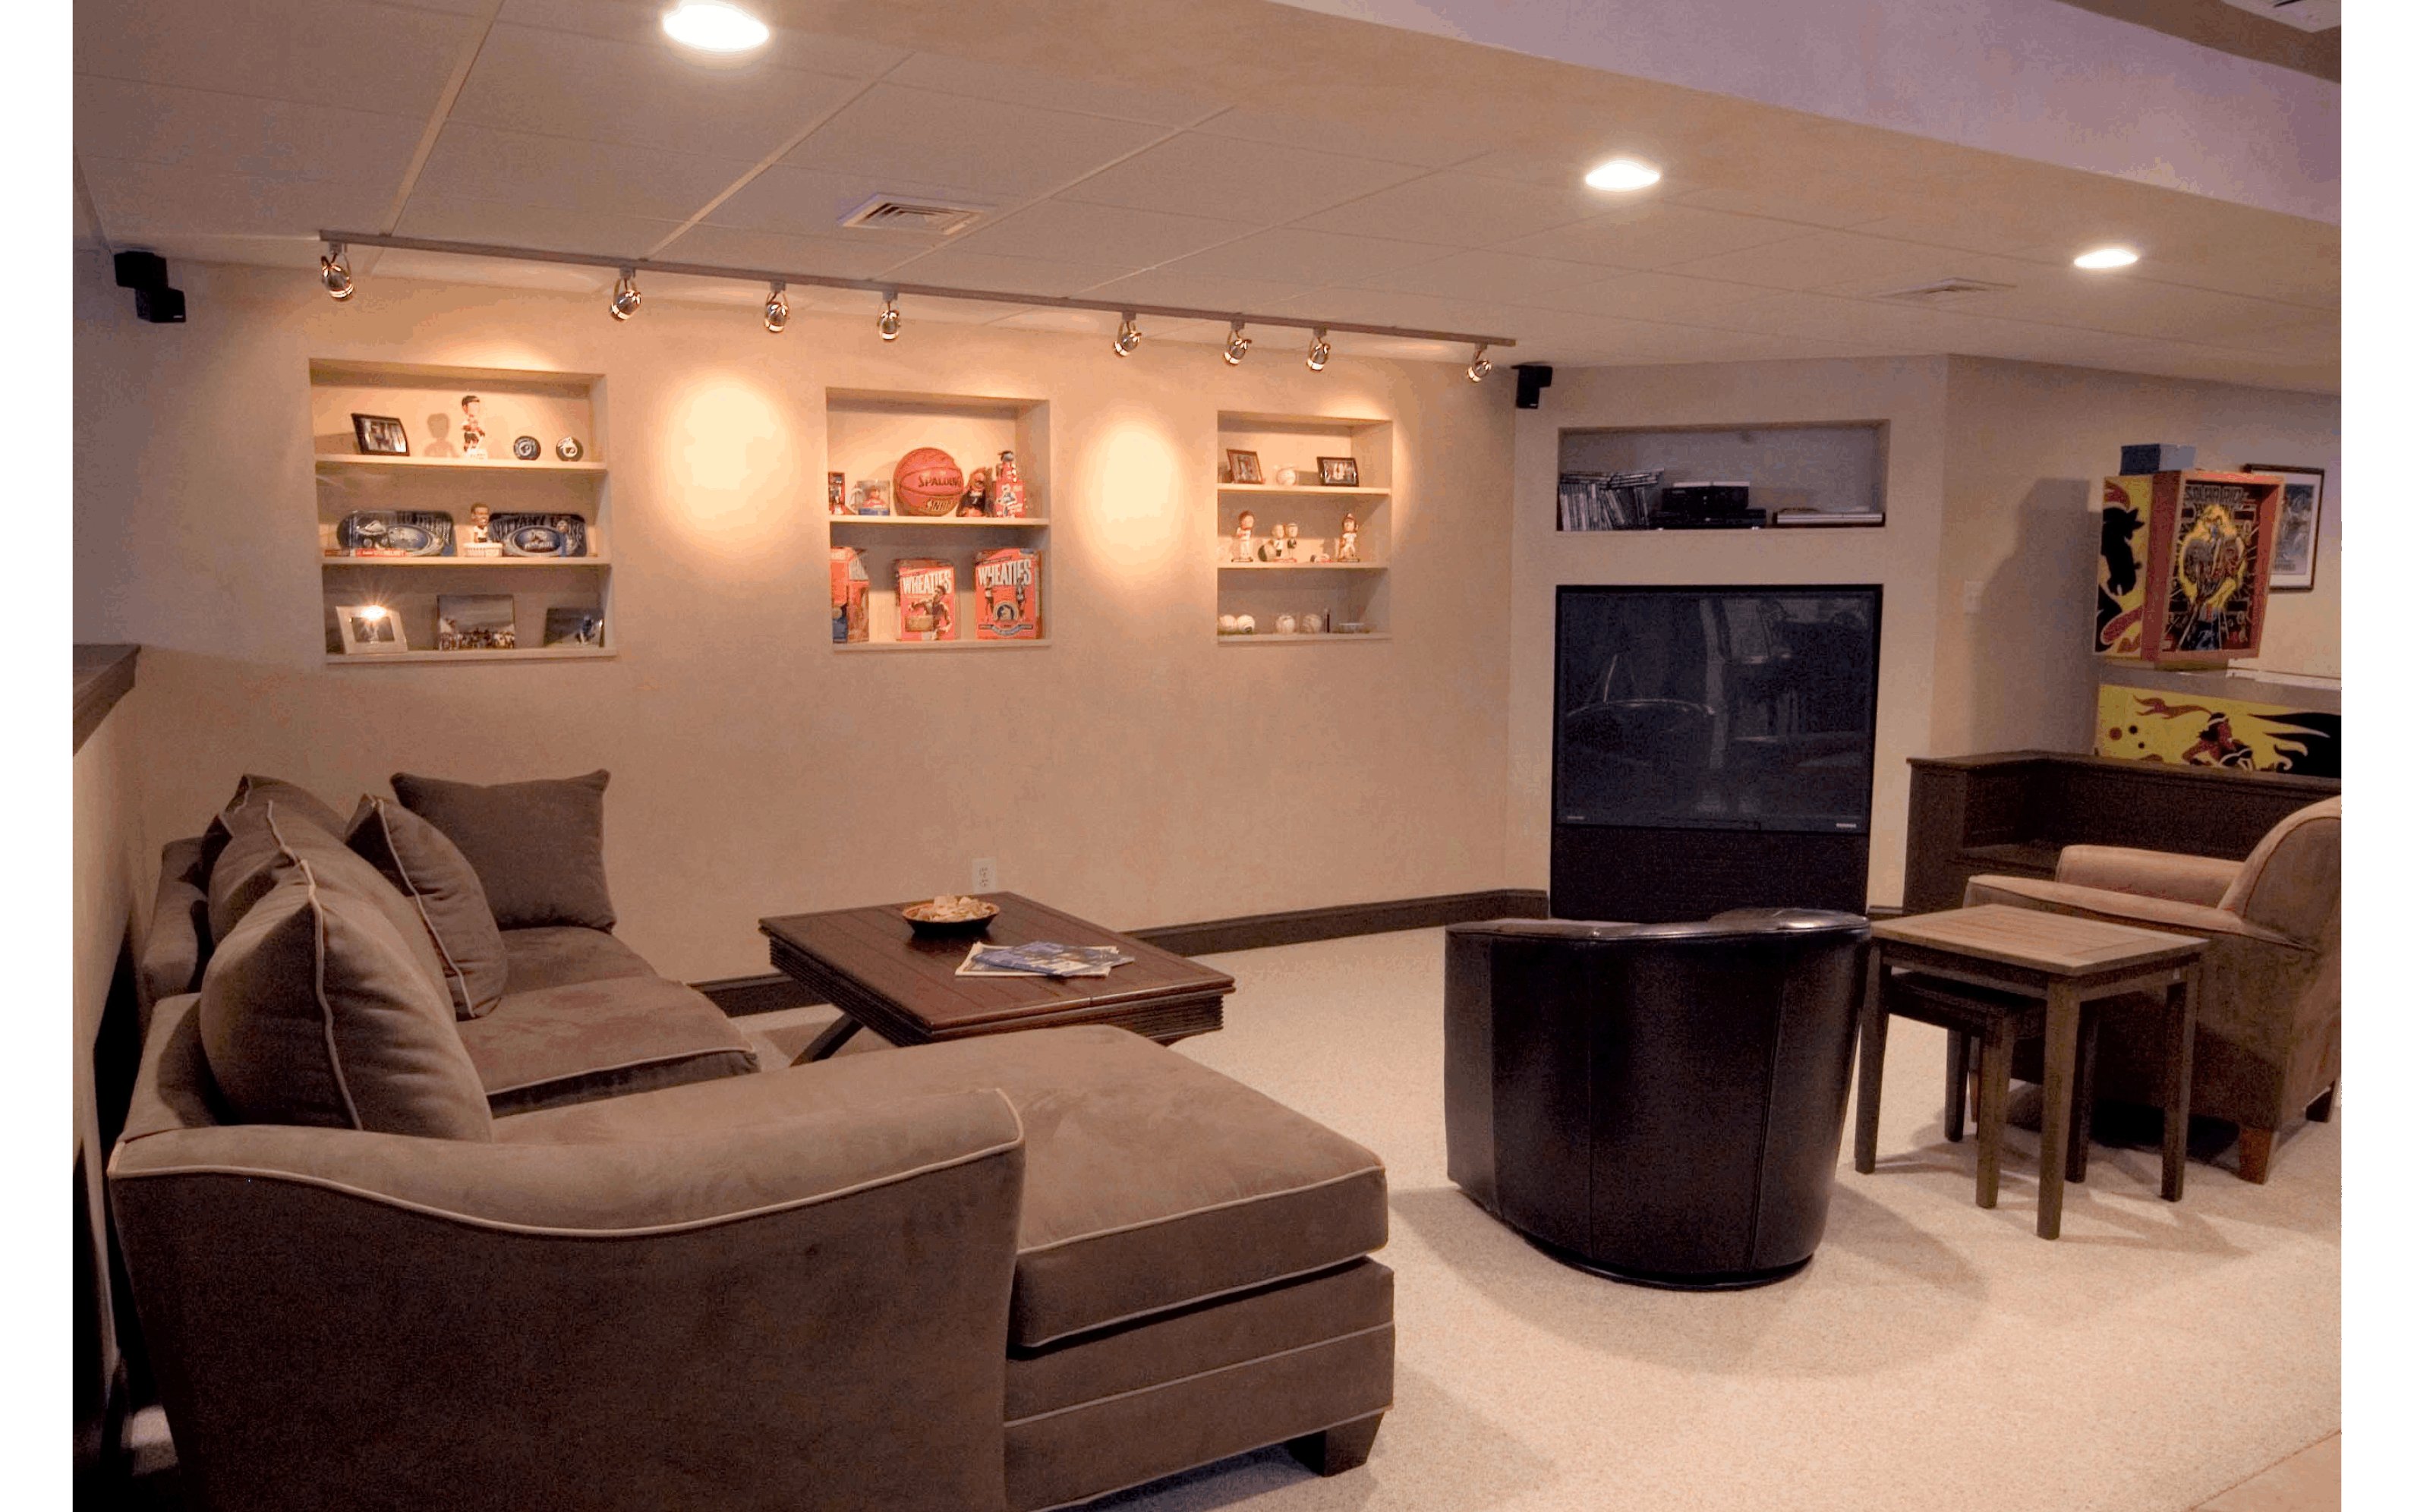 Sports bar basement remodel with shelves built into the walls and arcade games